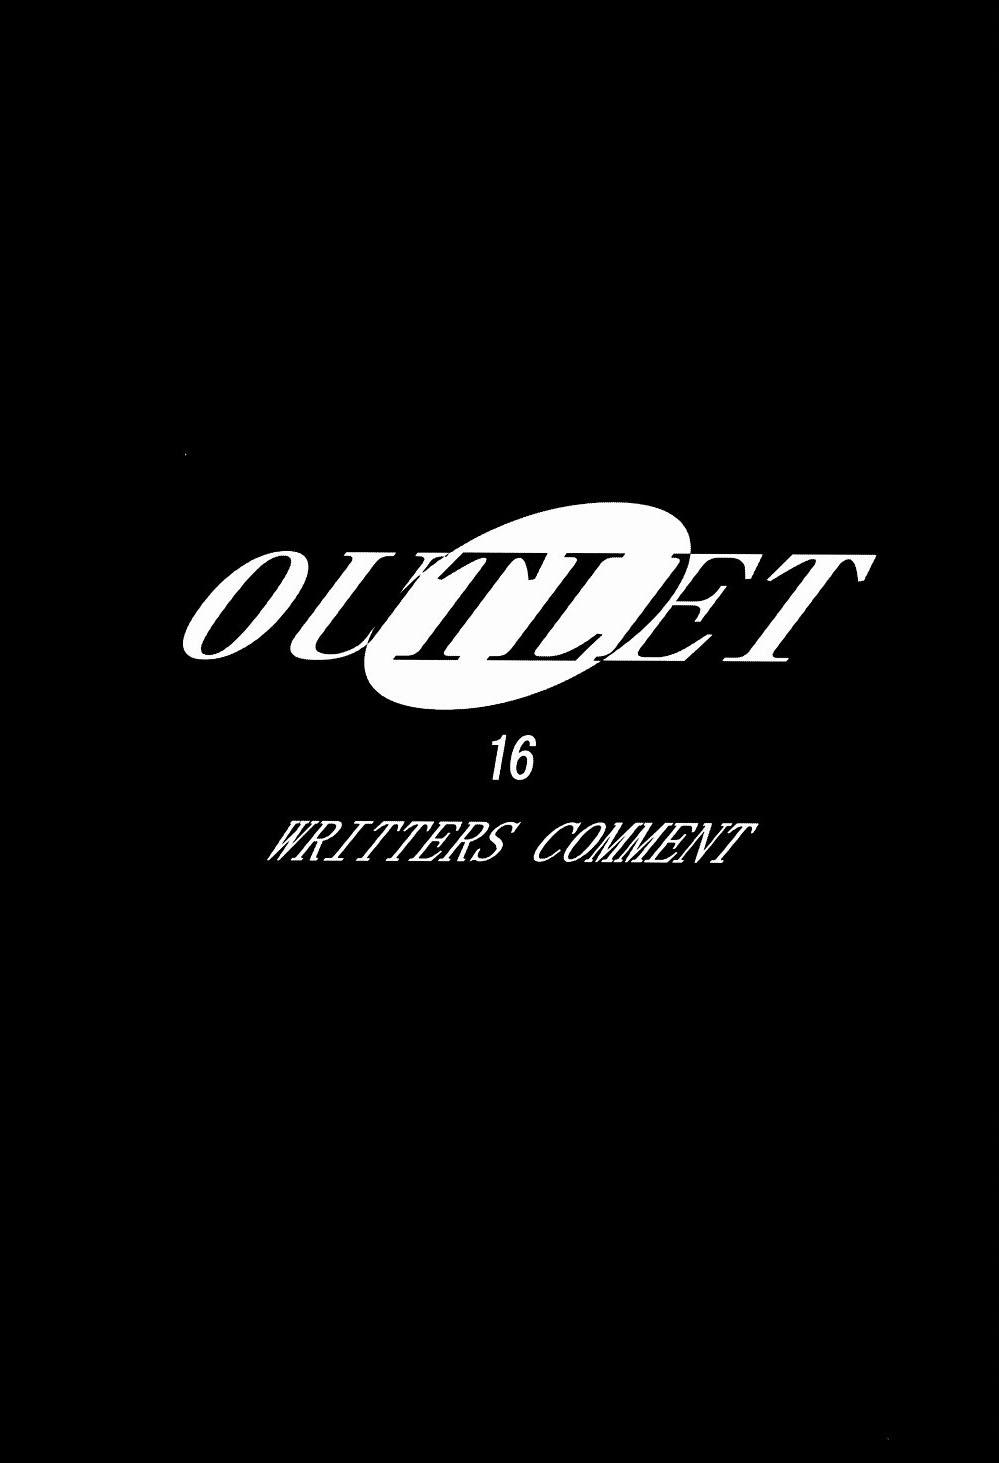 OUTLET 16 55